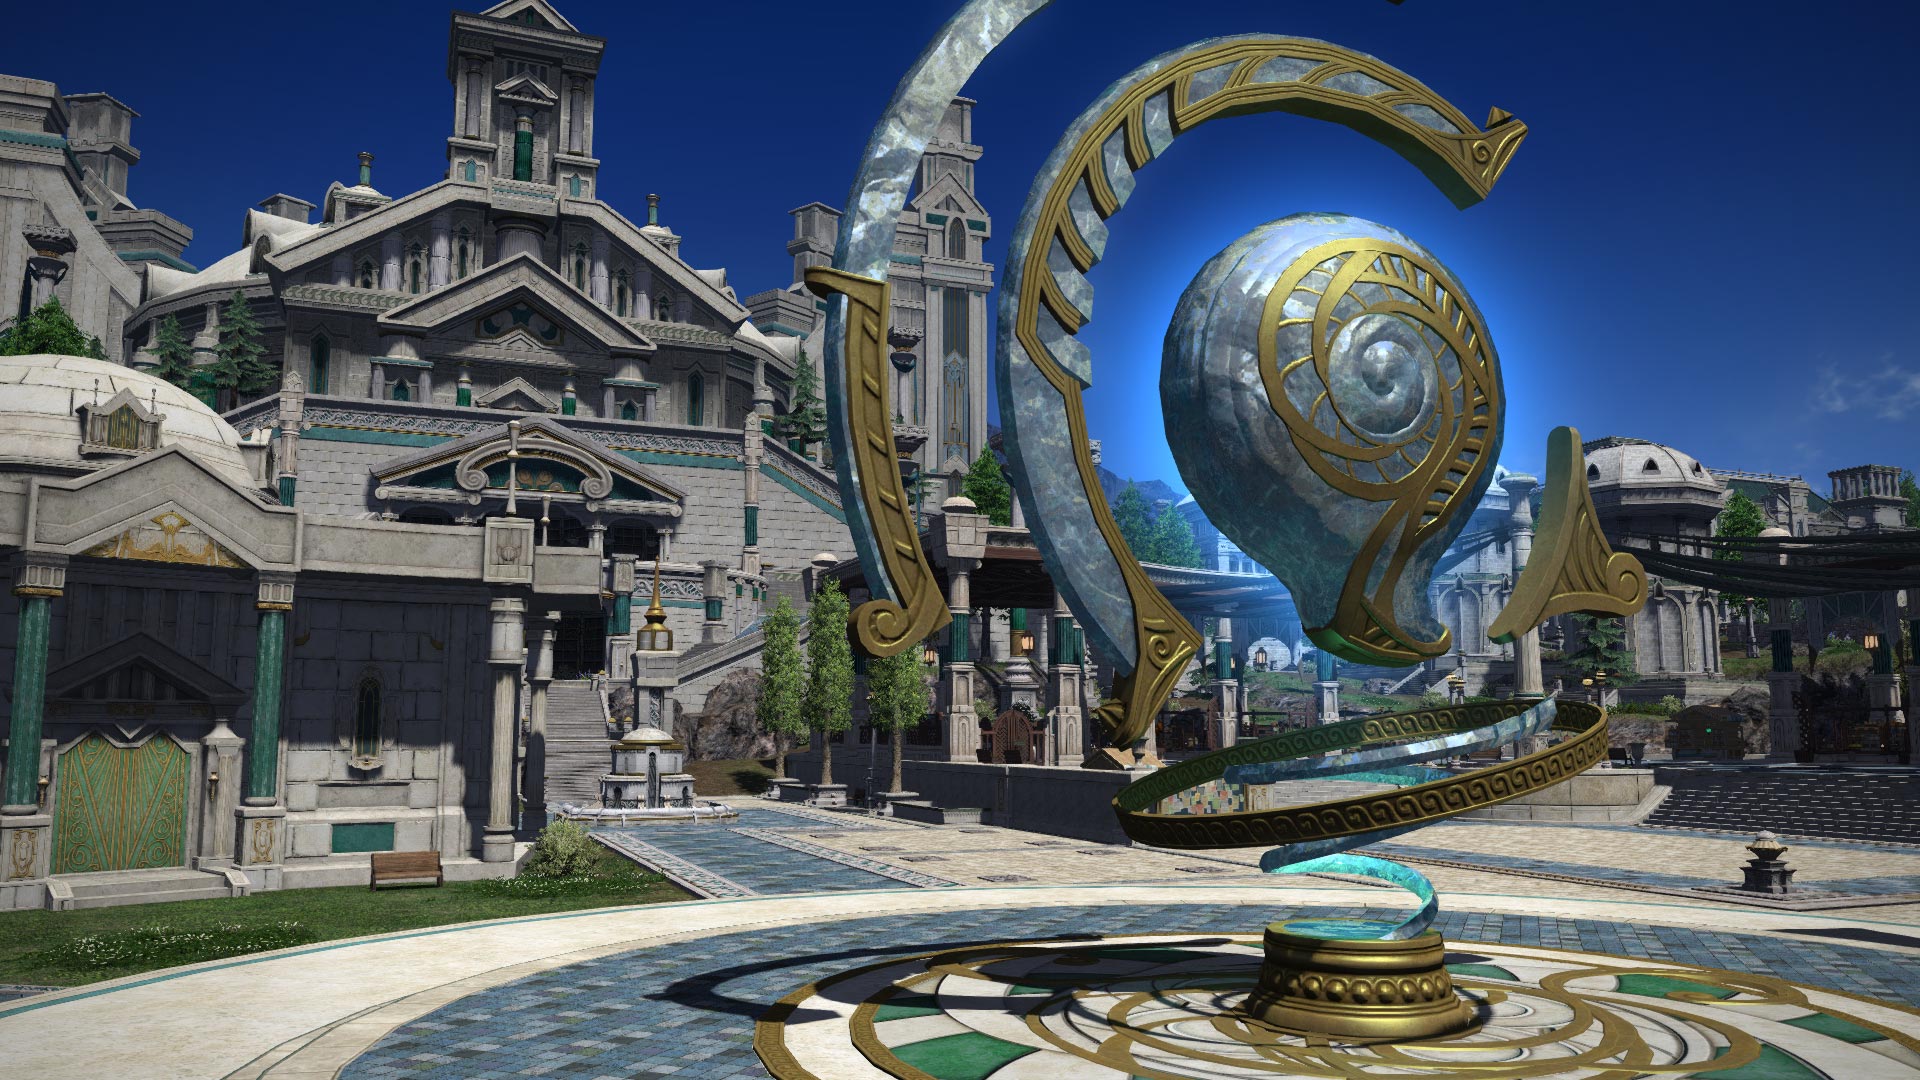 Image for FF14 Secret in the Box quest - How to solve the riddles in the letter to obtain the key